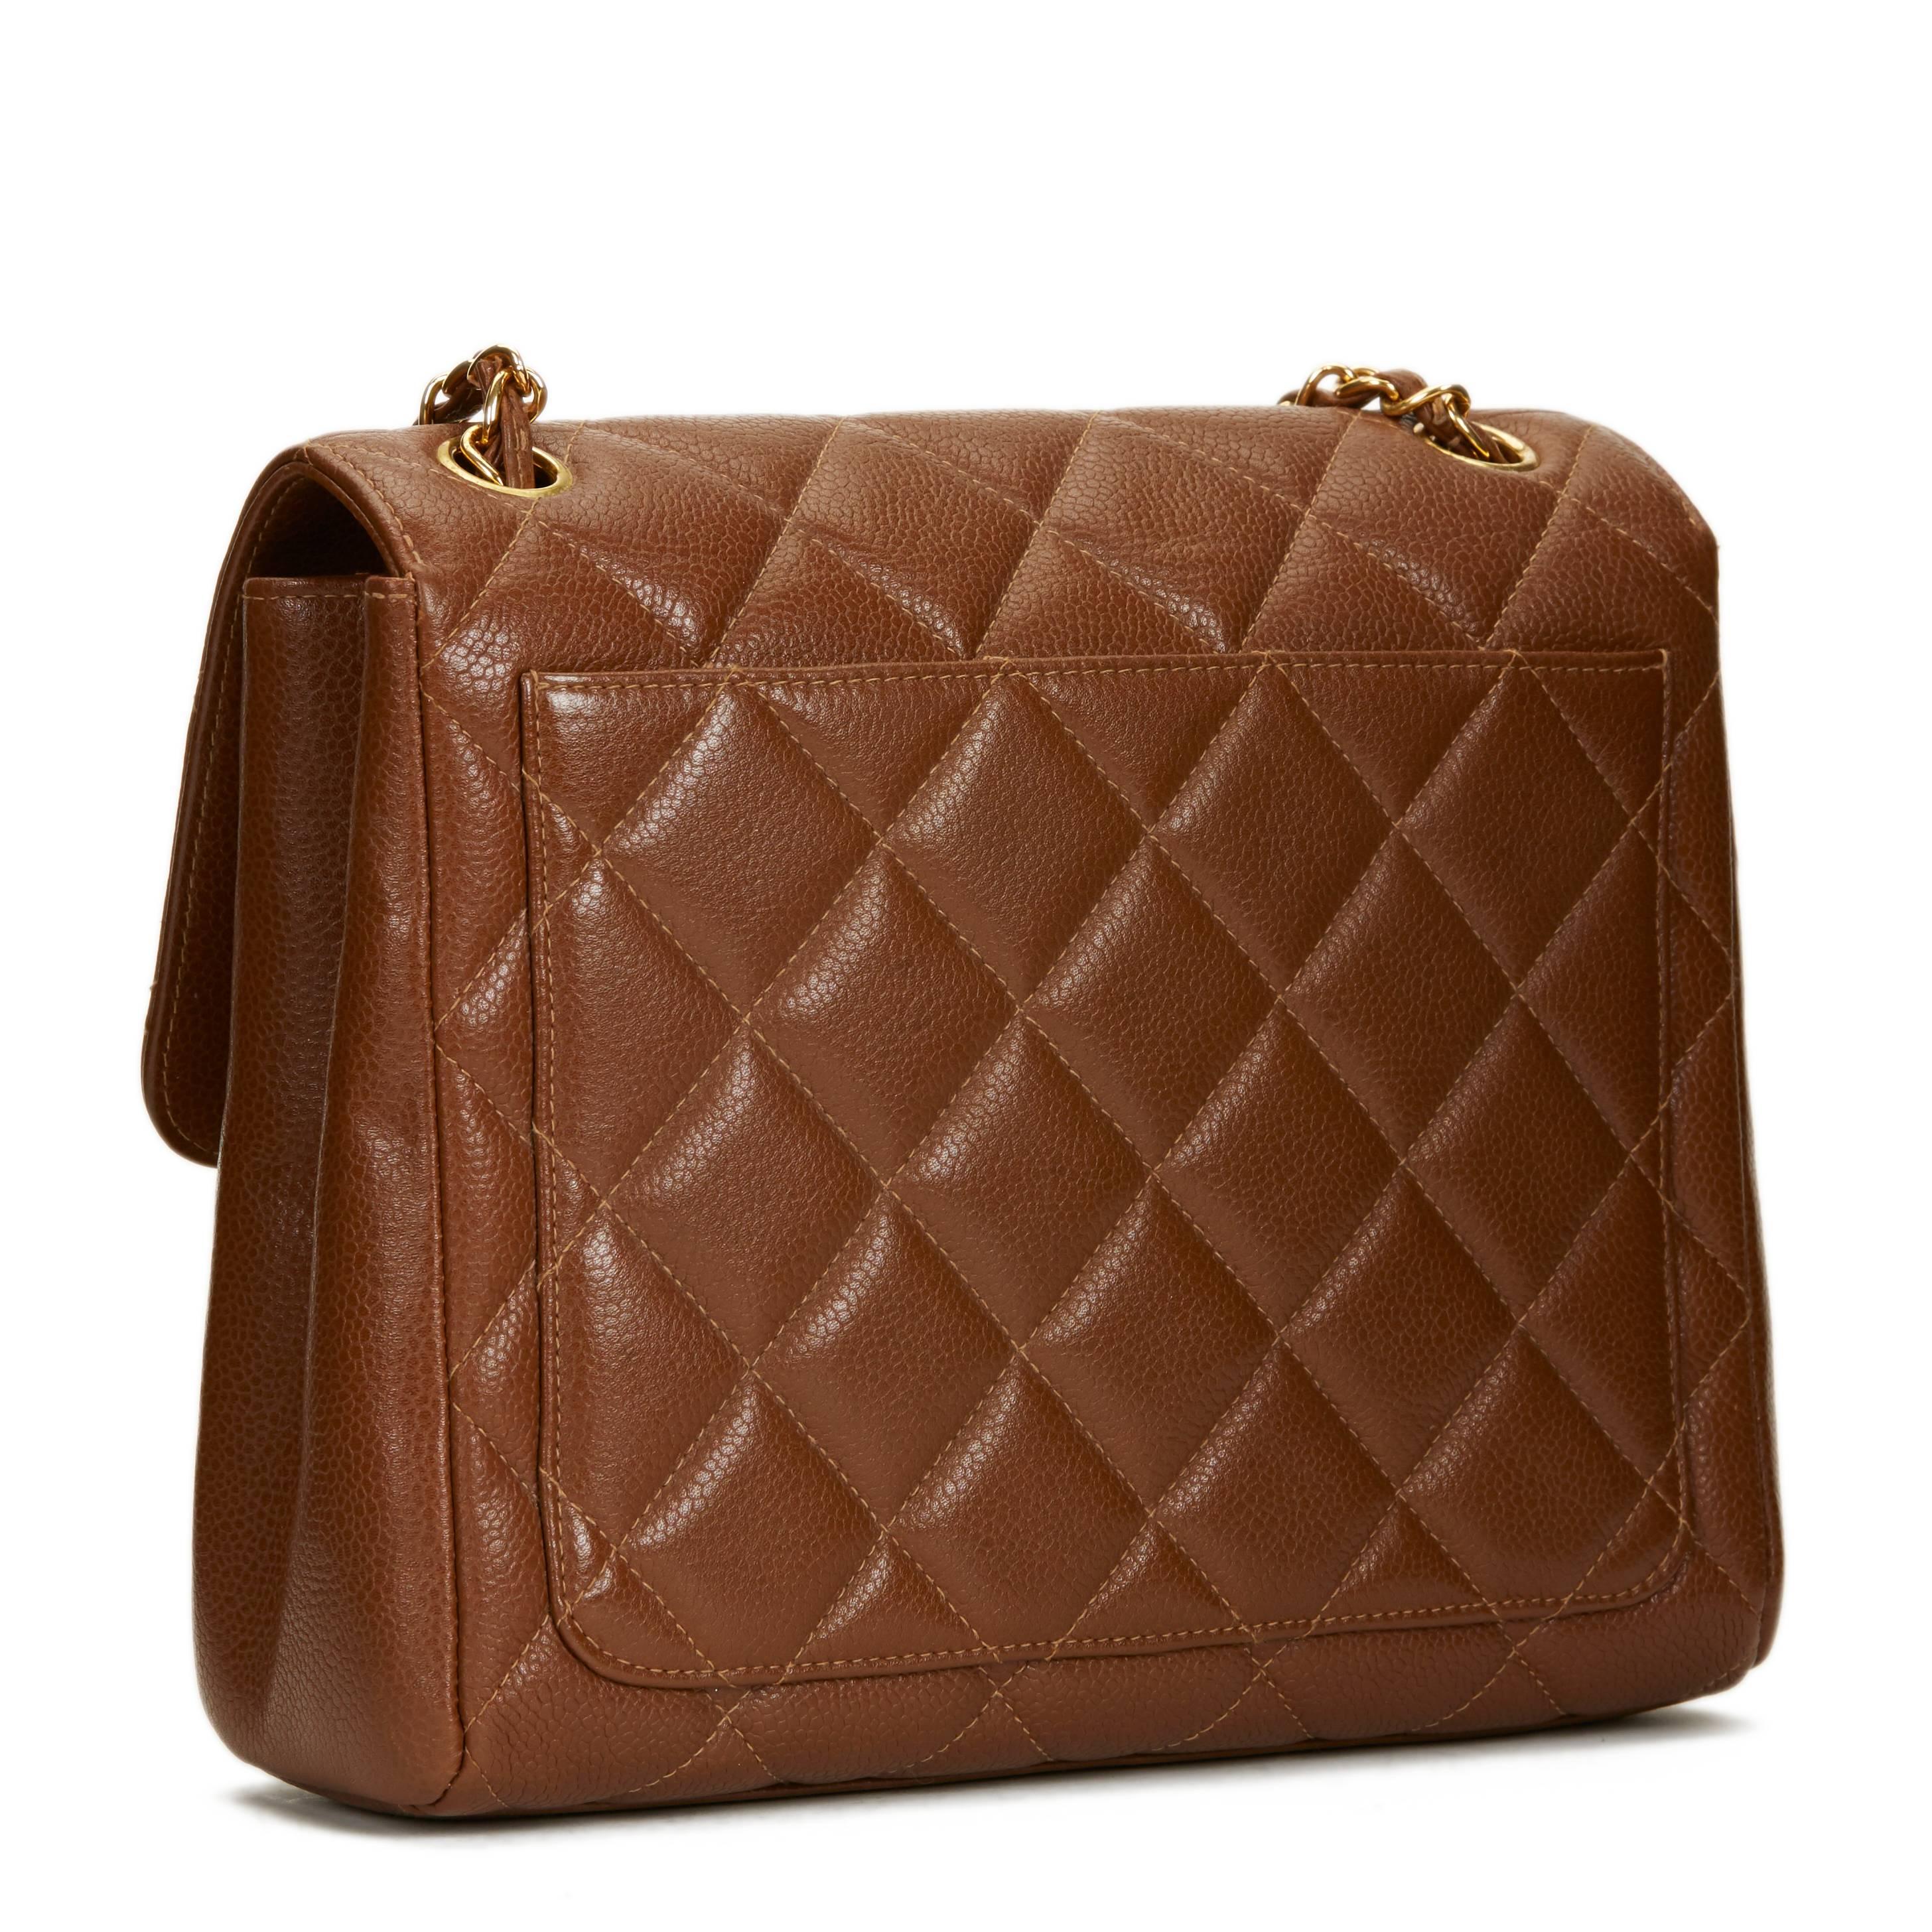 1990s Chanel Chocolate Brown Quilted Caviar Leather Vintage Single Flap Bag 3